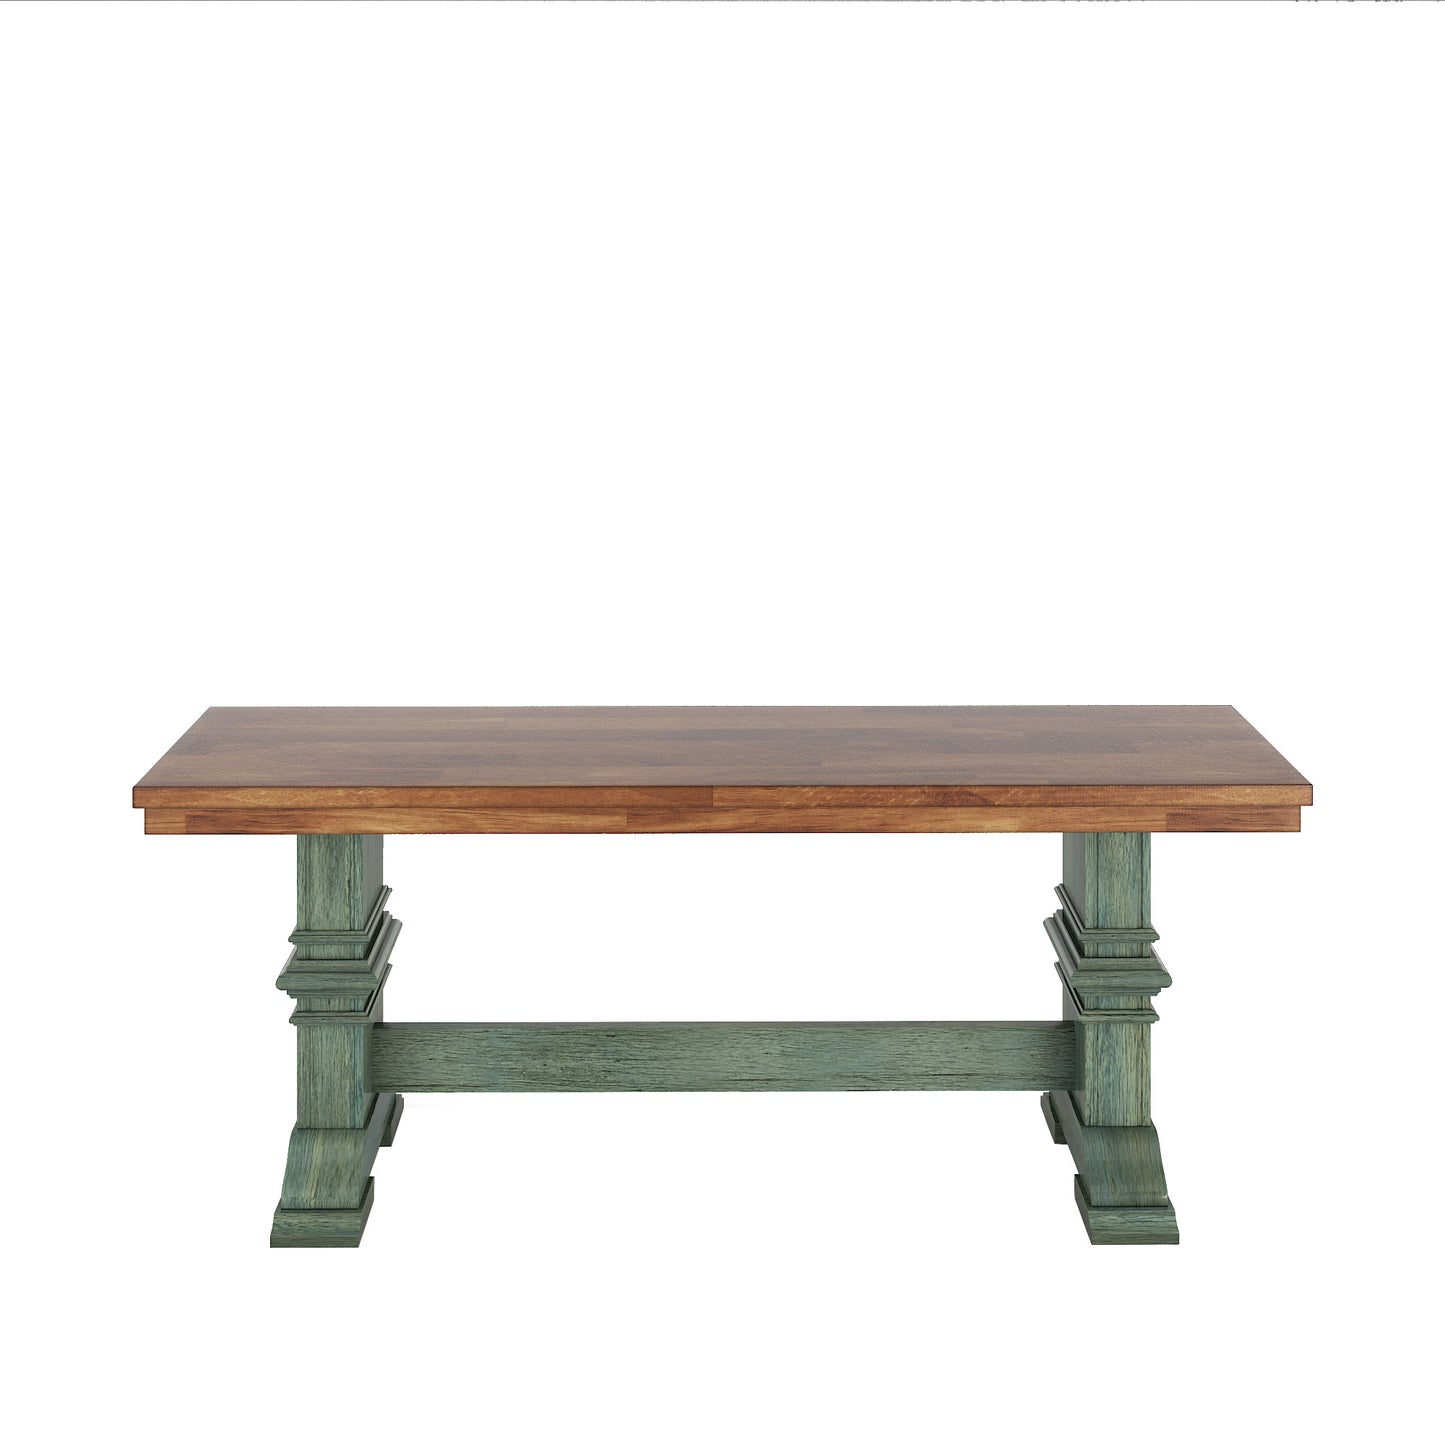 Two-Tone Trestle Leg Wood Dining Bench - Oak Top with Antique Sage Green Base